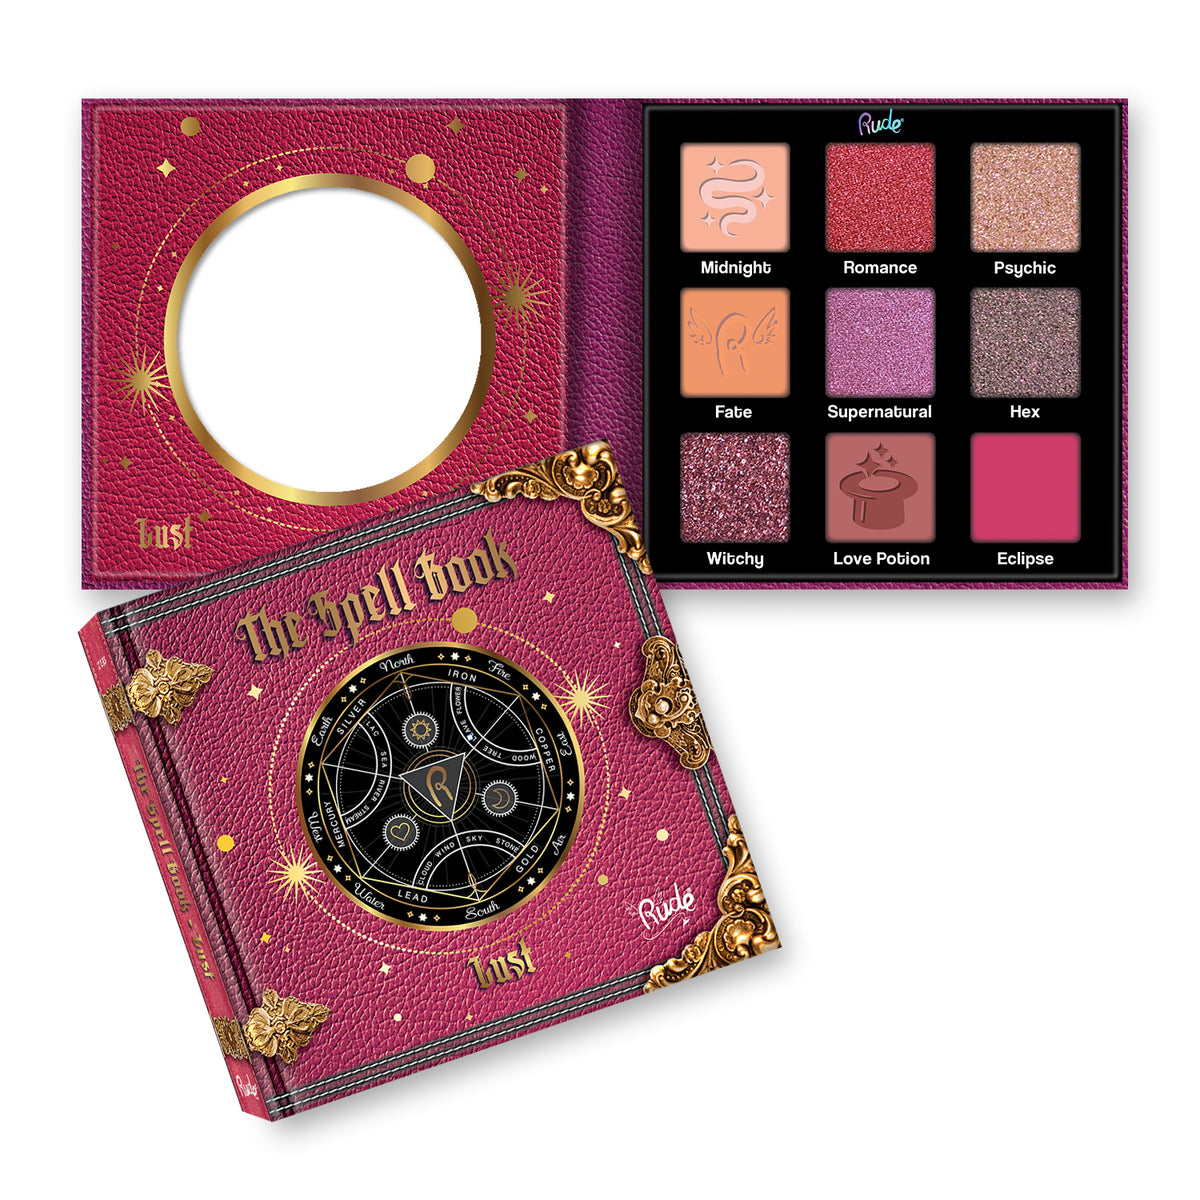 The Spell Book Eyeshadow Palette Display Set A, 24 pcs